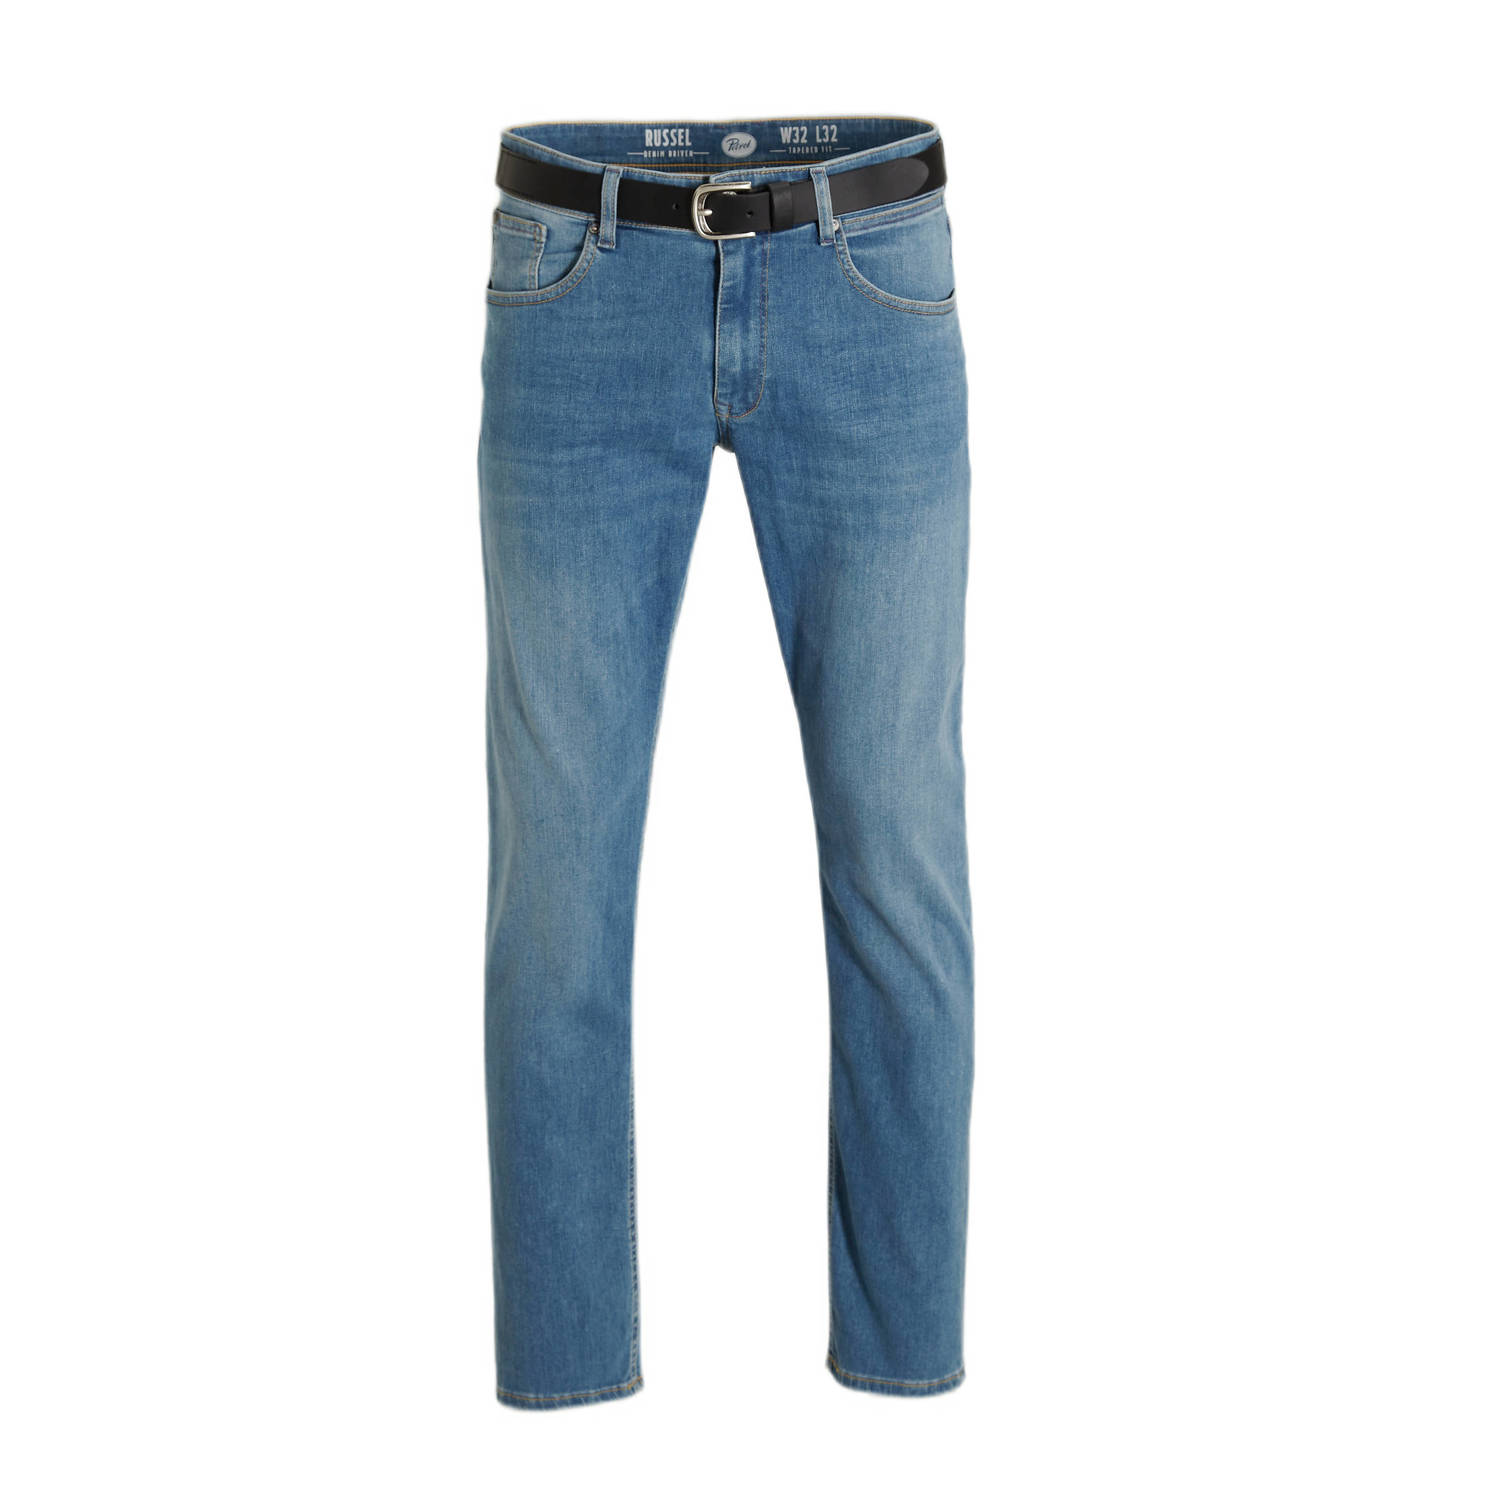 Petrol Industries tapered fit jeans RUSSEL-CLASSIC light stone